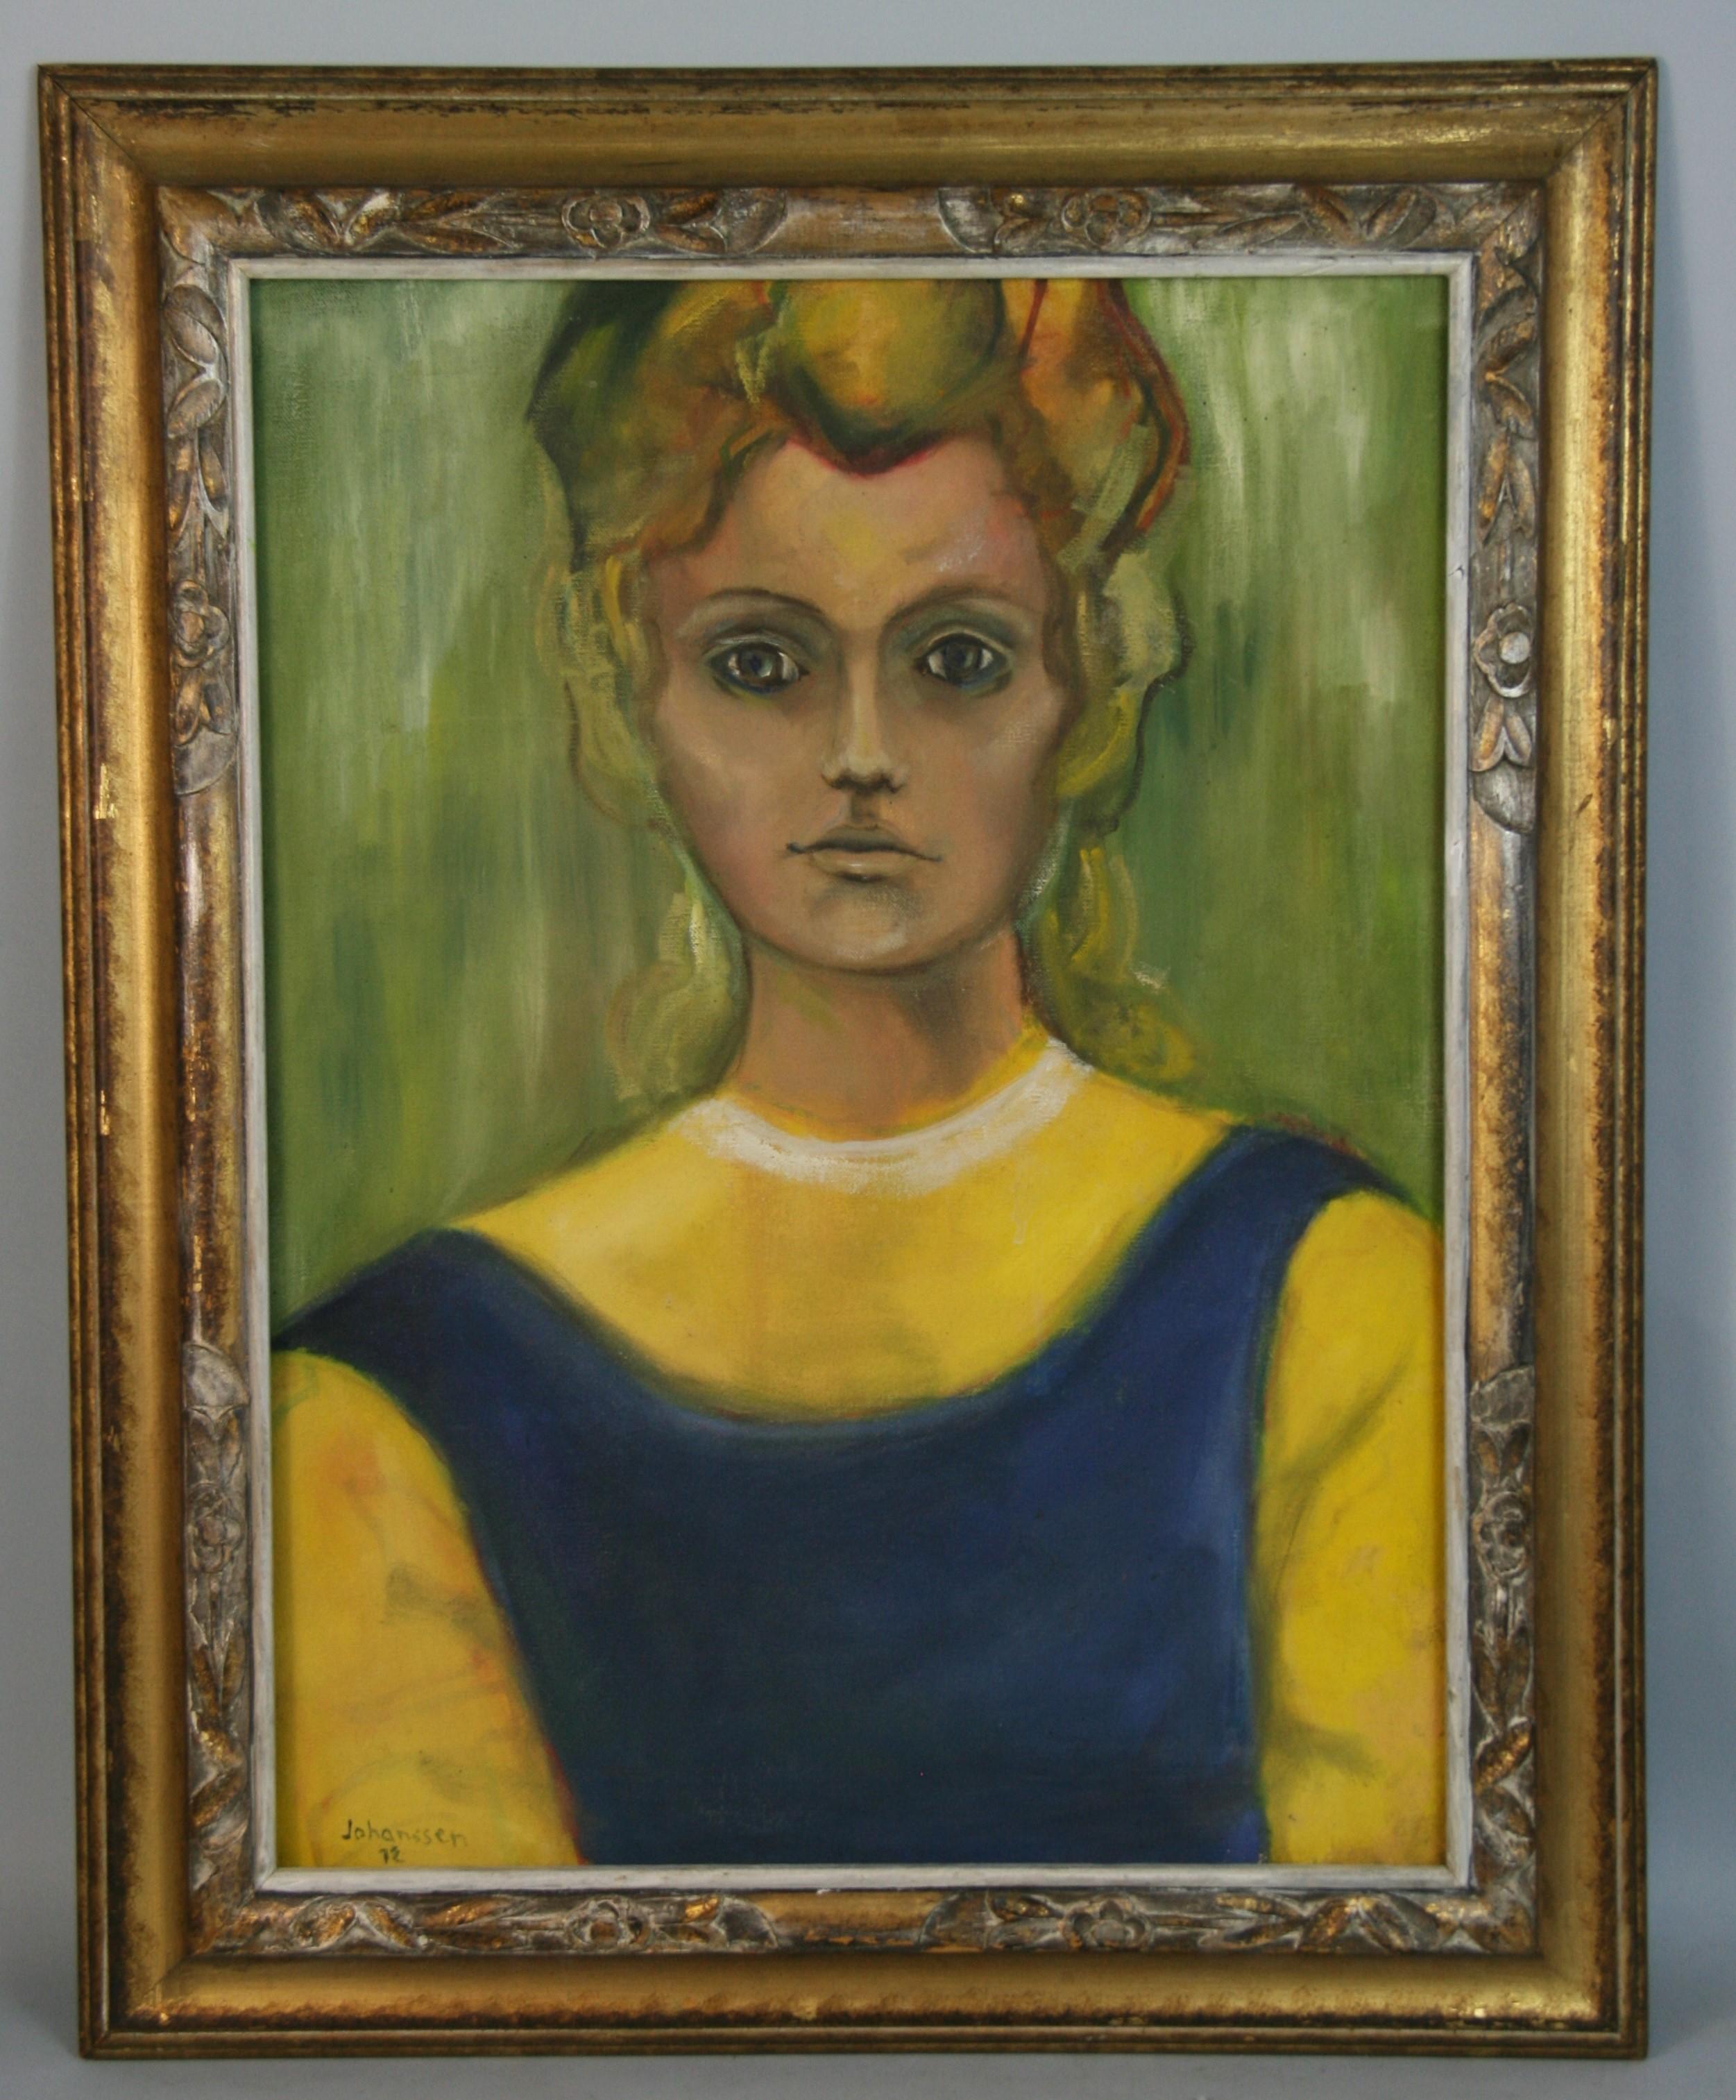 5030 Scandinavian female figurative painting

Set in a hand carved wood frame. Image size 23x17"
Signed Johanssen